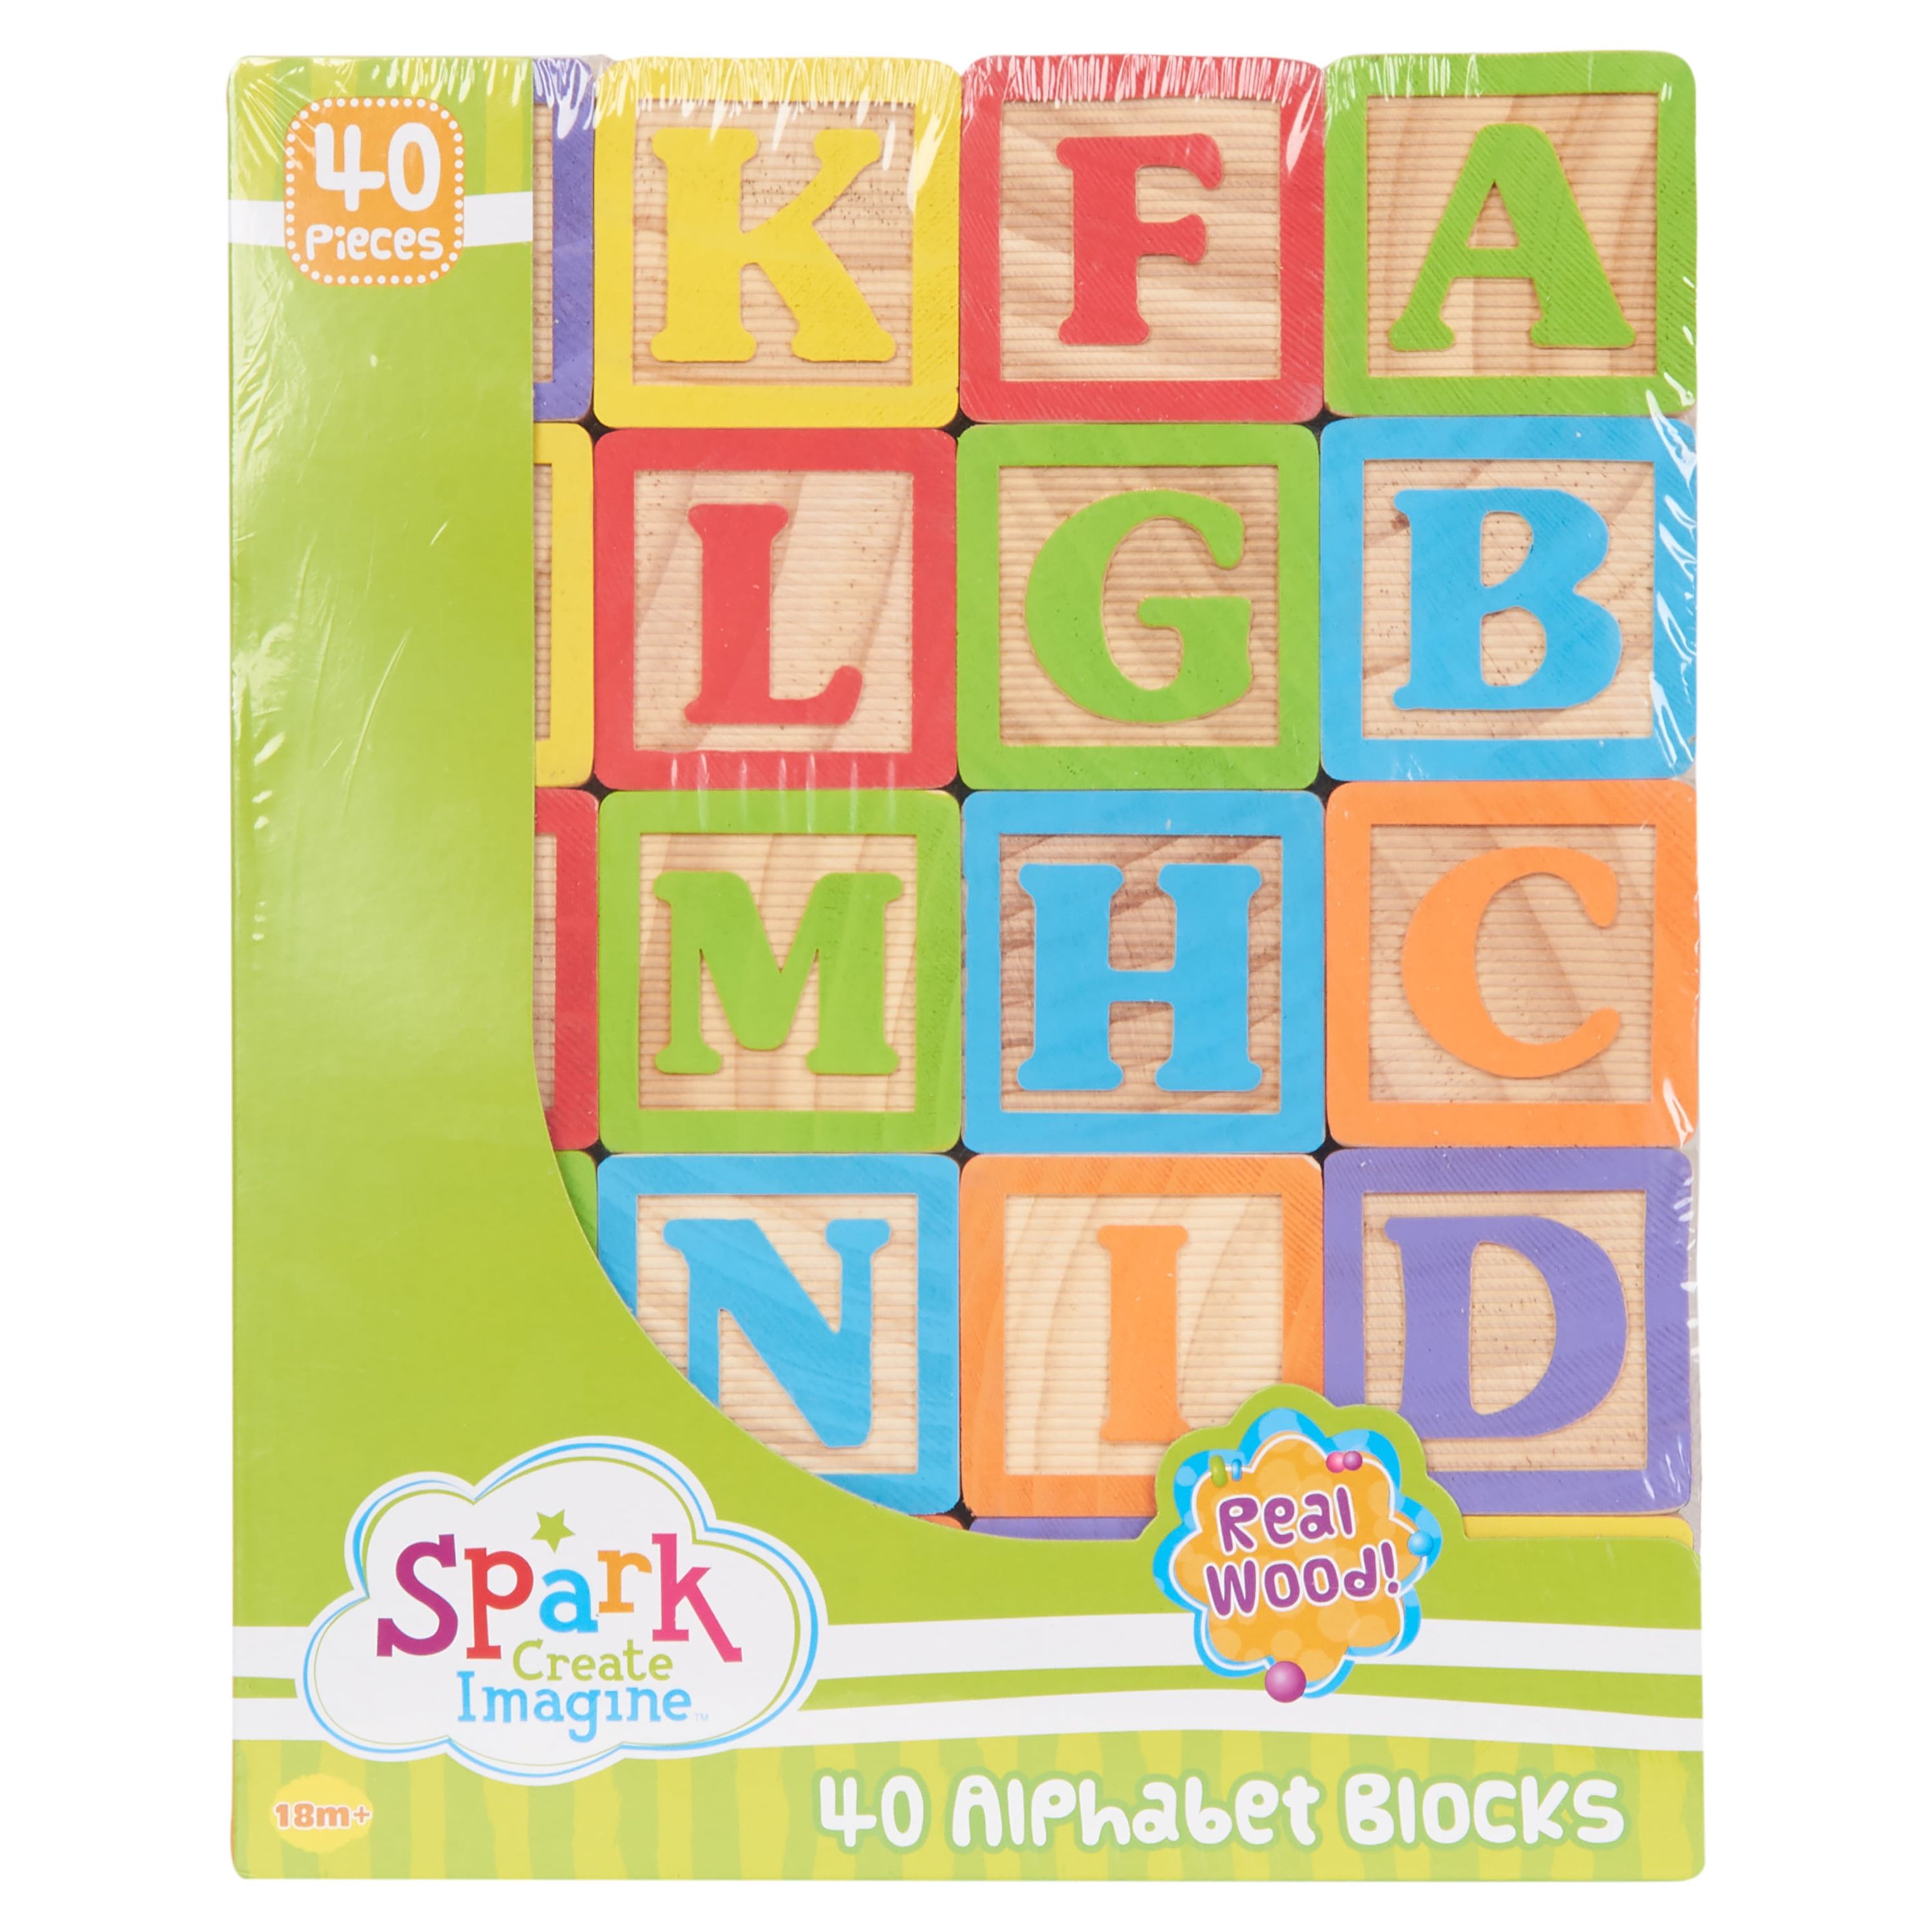 Spark. Create. Imagine 40 Piece ABC Alphabet toy with wooden blocks with bright graphics - image 2 of 9